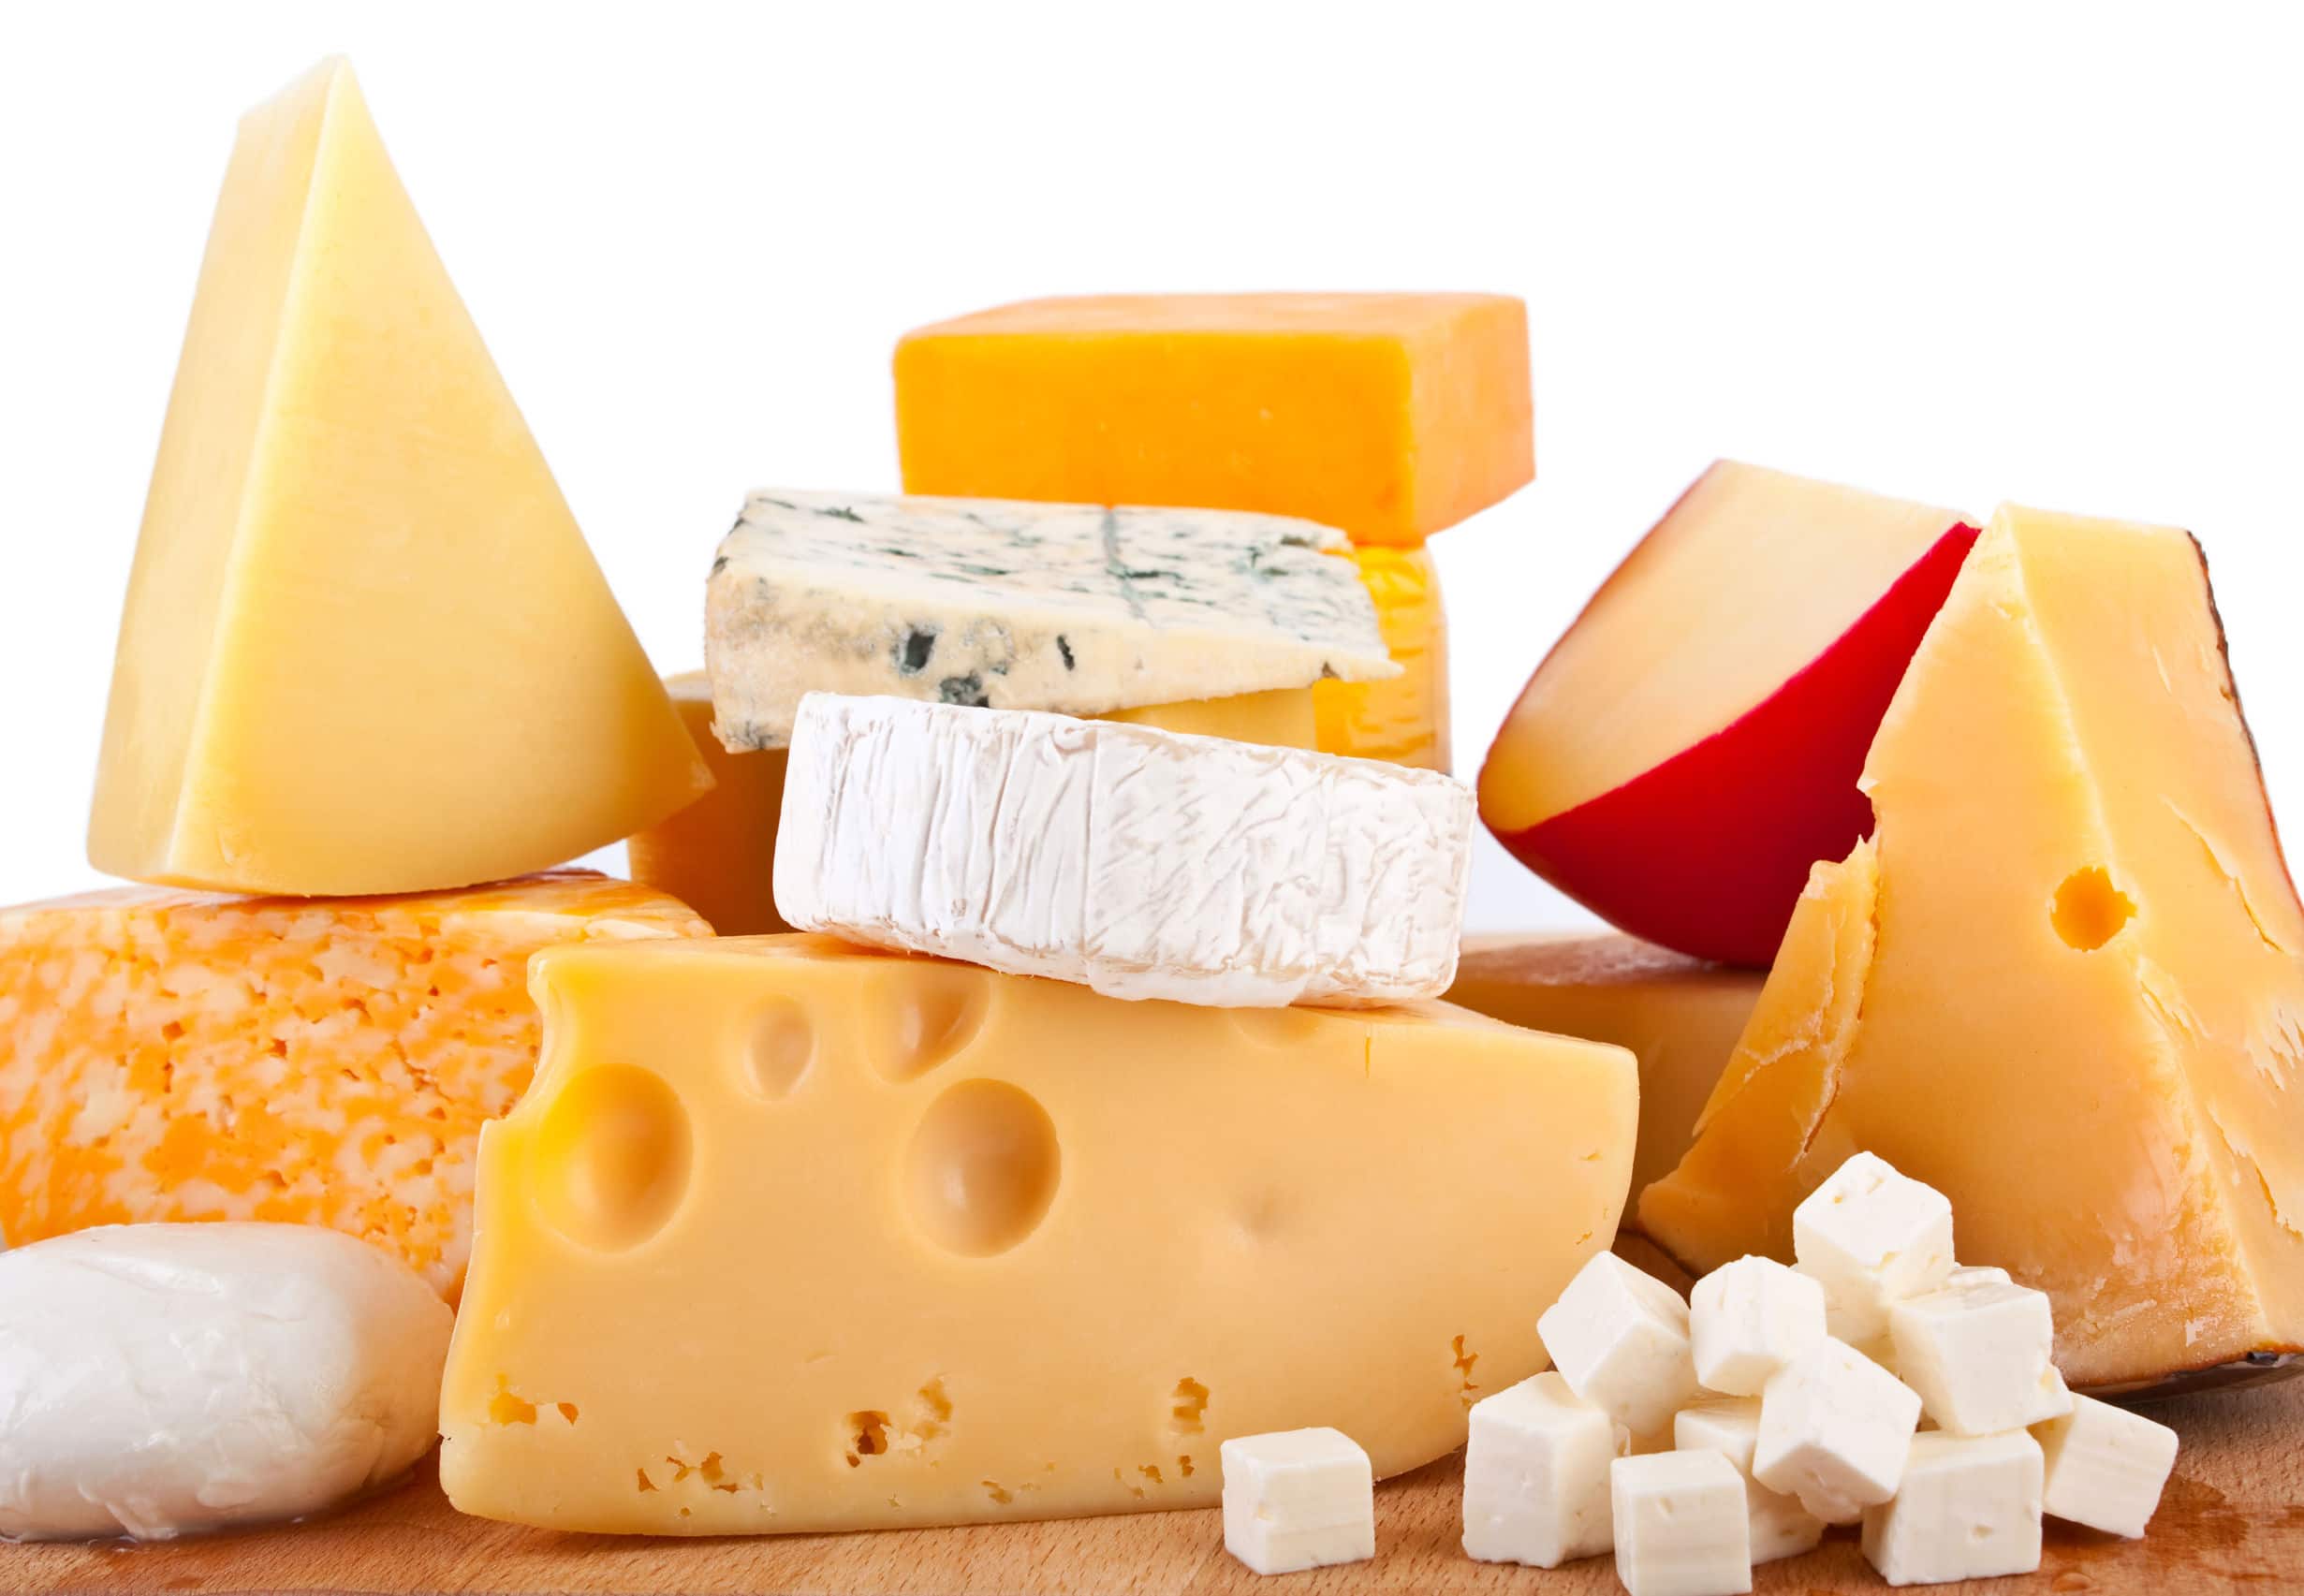 Featured image for “Tasting The Cheeses Of Chula: The Top 4 Cheese Dishes”